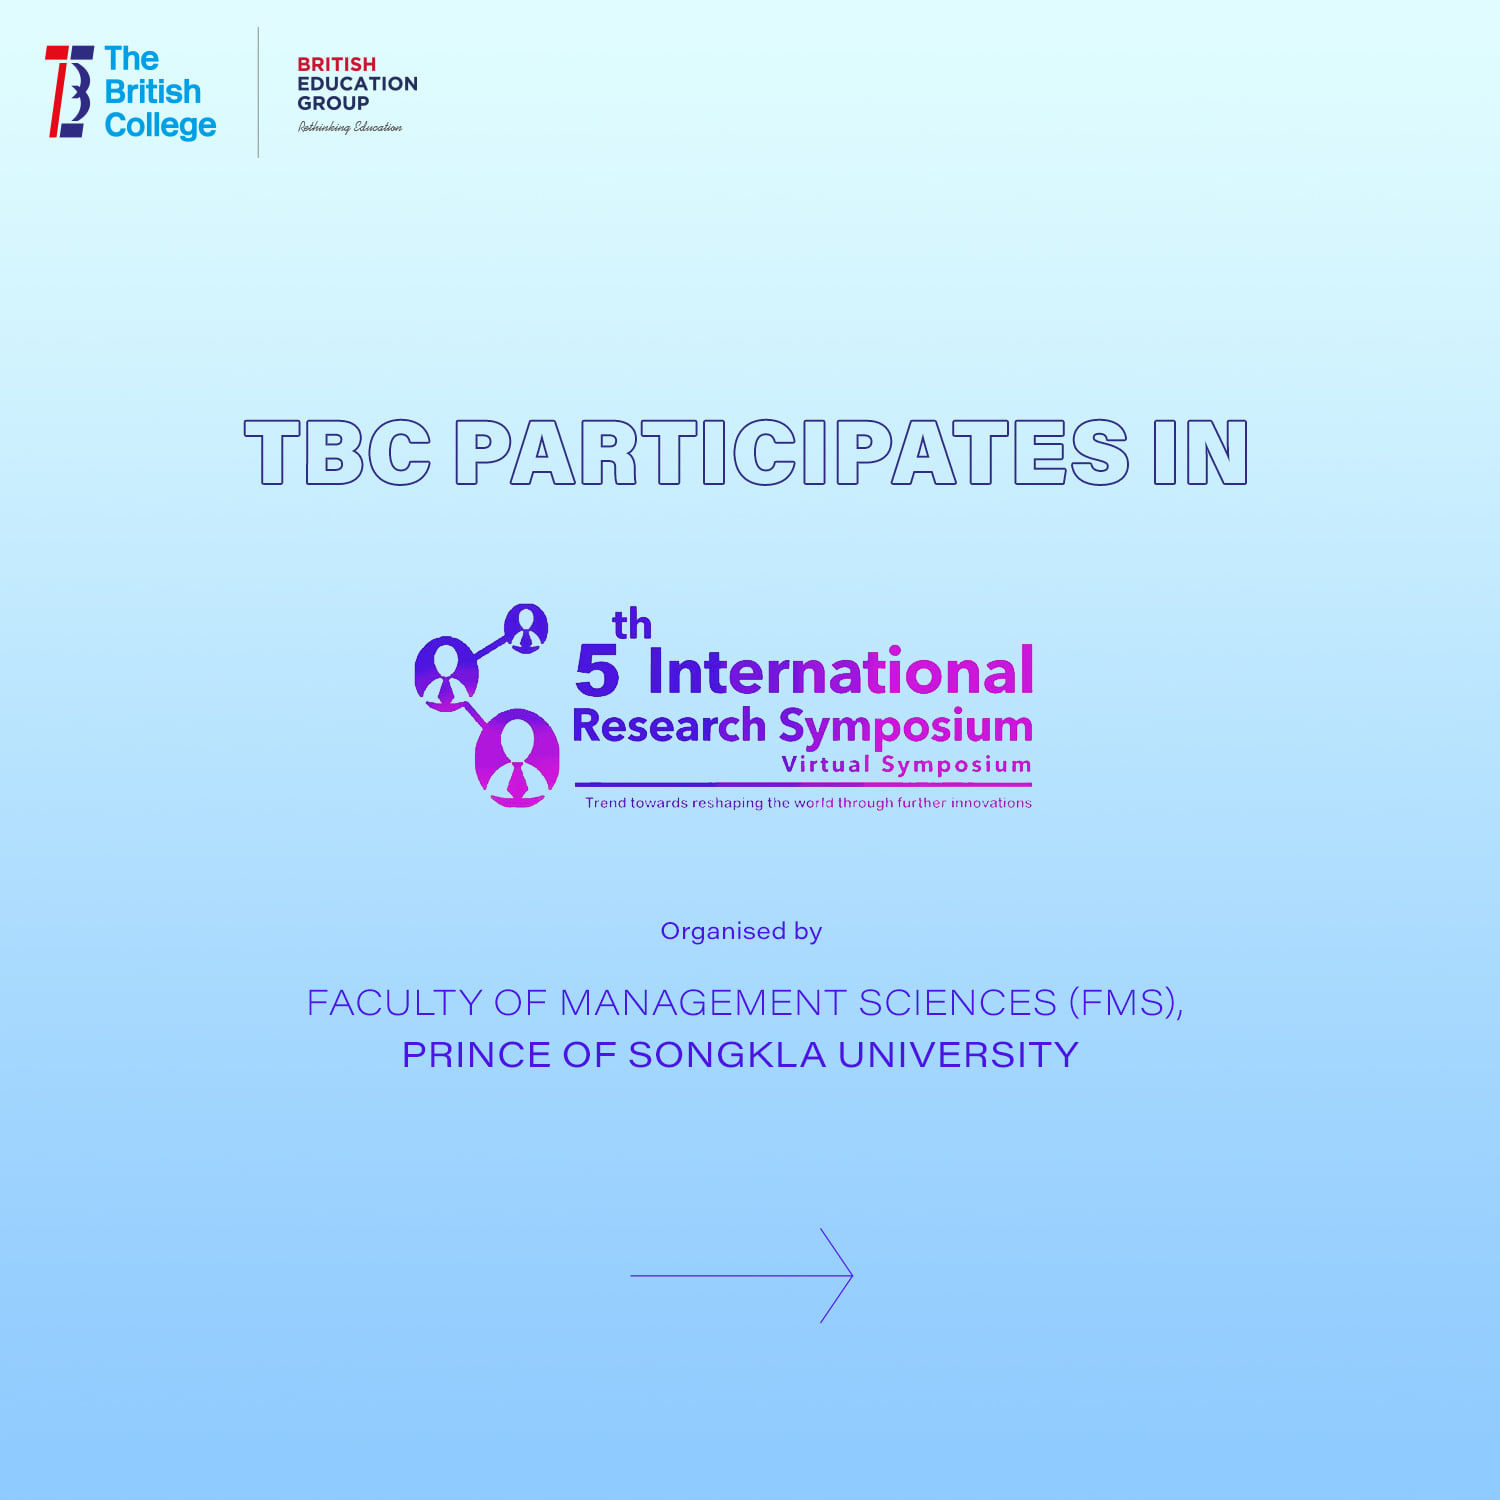 The 5th International Research Symposium